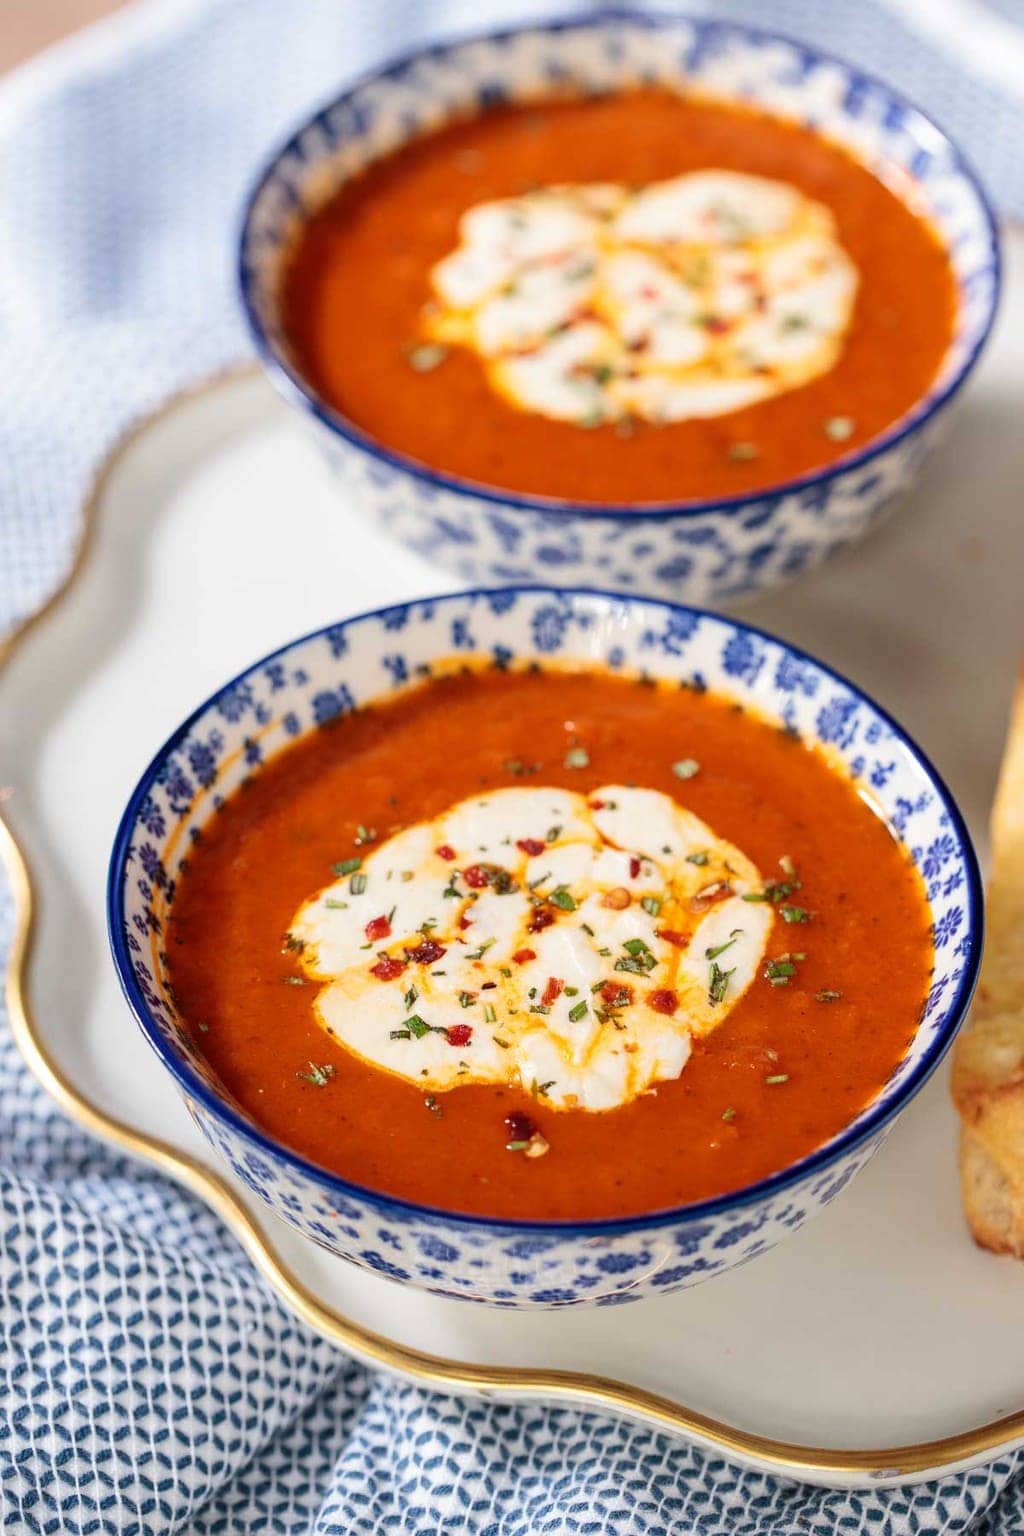 Photo of two blue and white patterned bowls filled with Roasted Red Pepper Tomato Soup, one of The Cafe Sucre Farine's Soup Recipes. The bowls are sitting on a gold-edged serving plate resting on a blue and white patterned napkin.